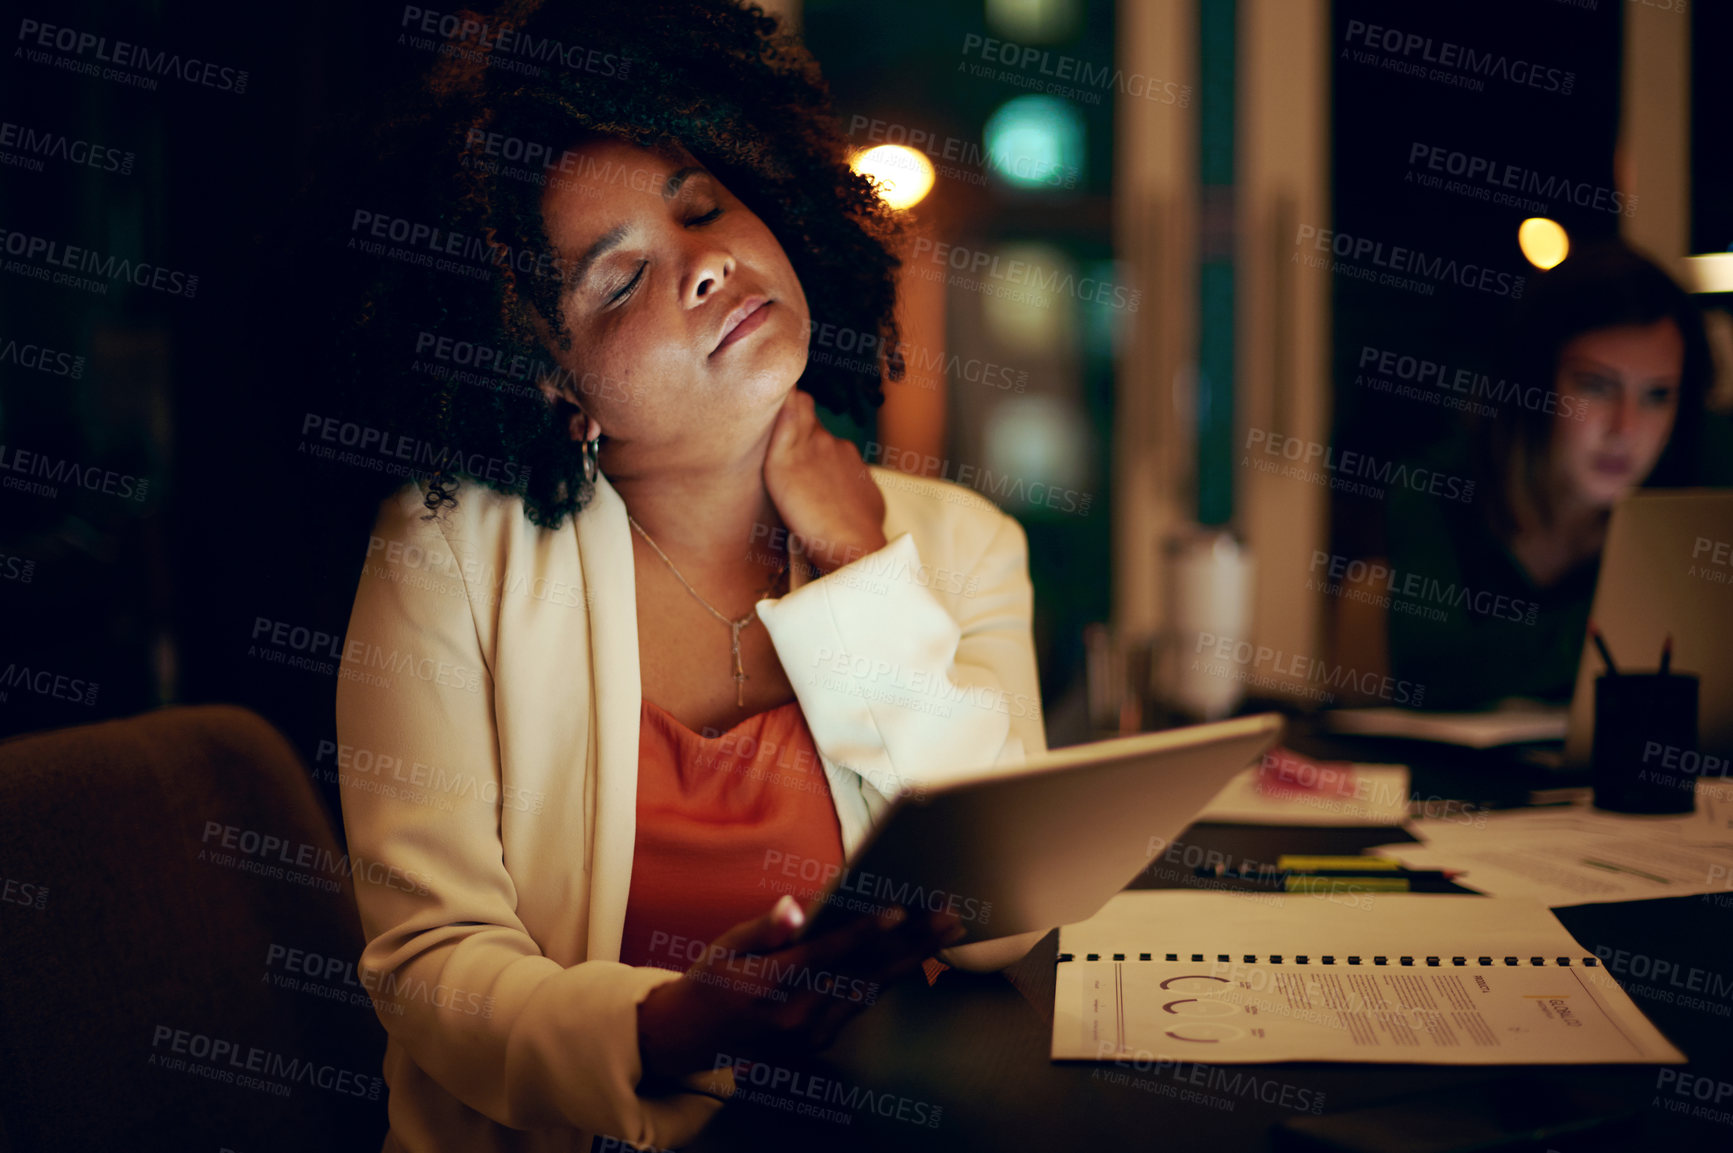 Buy stock photo Shot of a businesswoman experiencing neck pain while using a digital tablet in an office at night